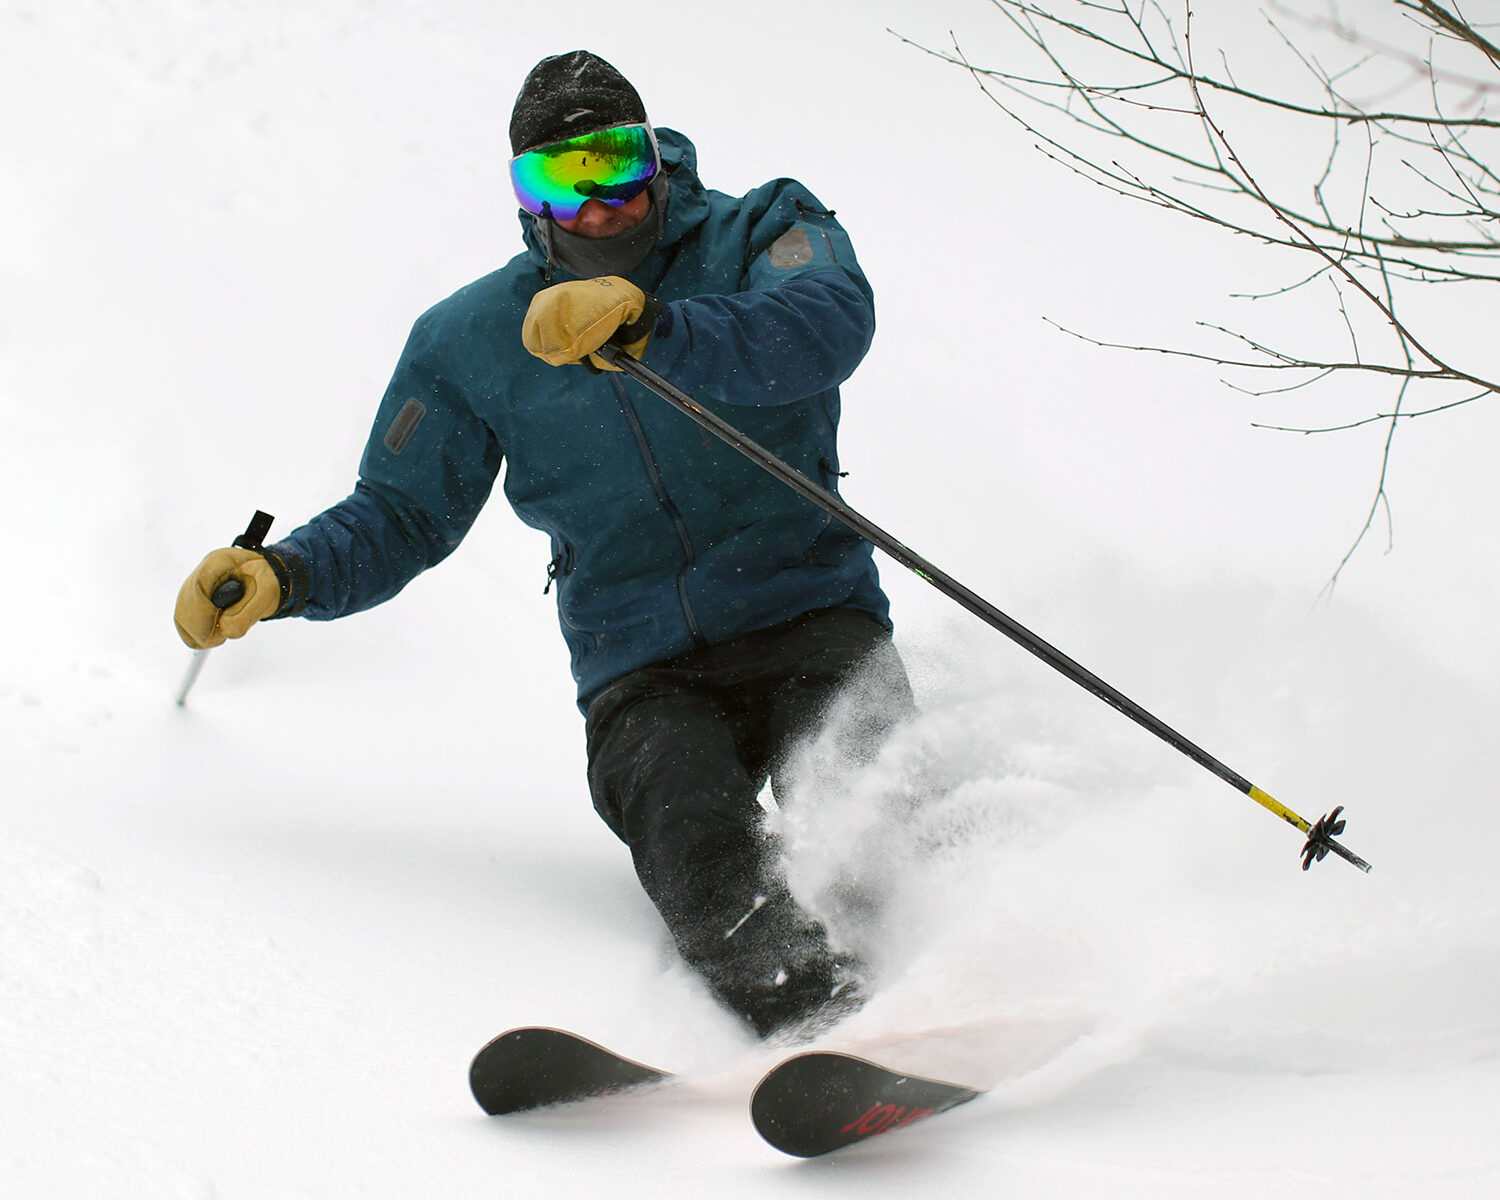 A close-up shot of Dave skiing the powder of Winter Storm Landon at Bolton Valley Ski Resort in Vermont